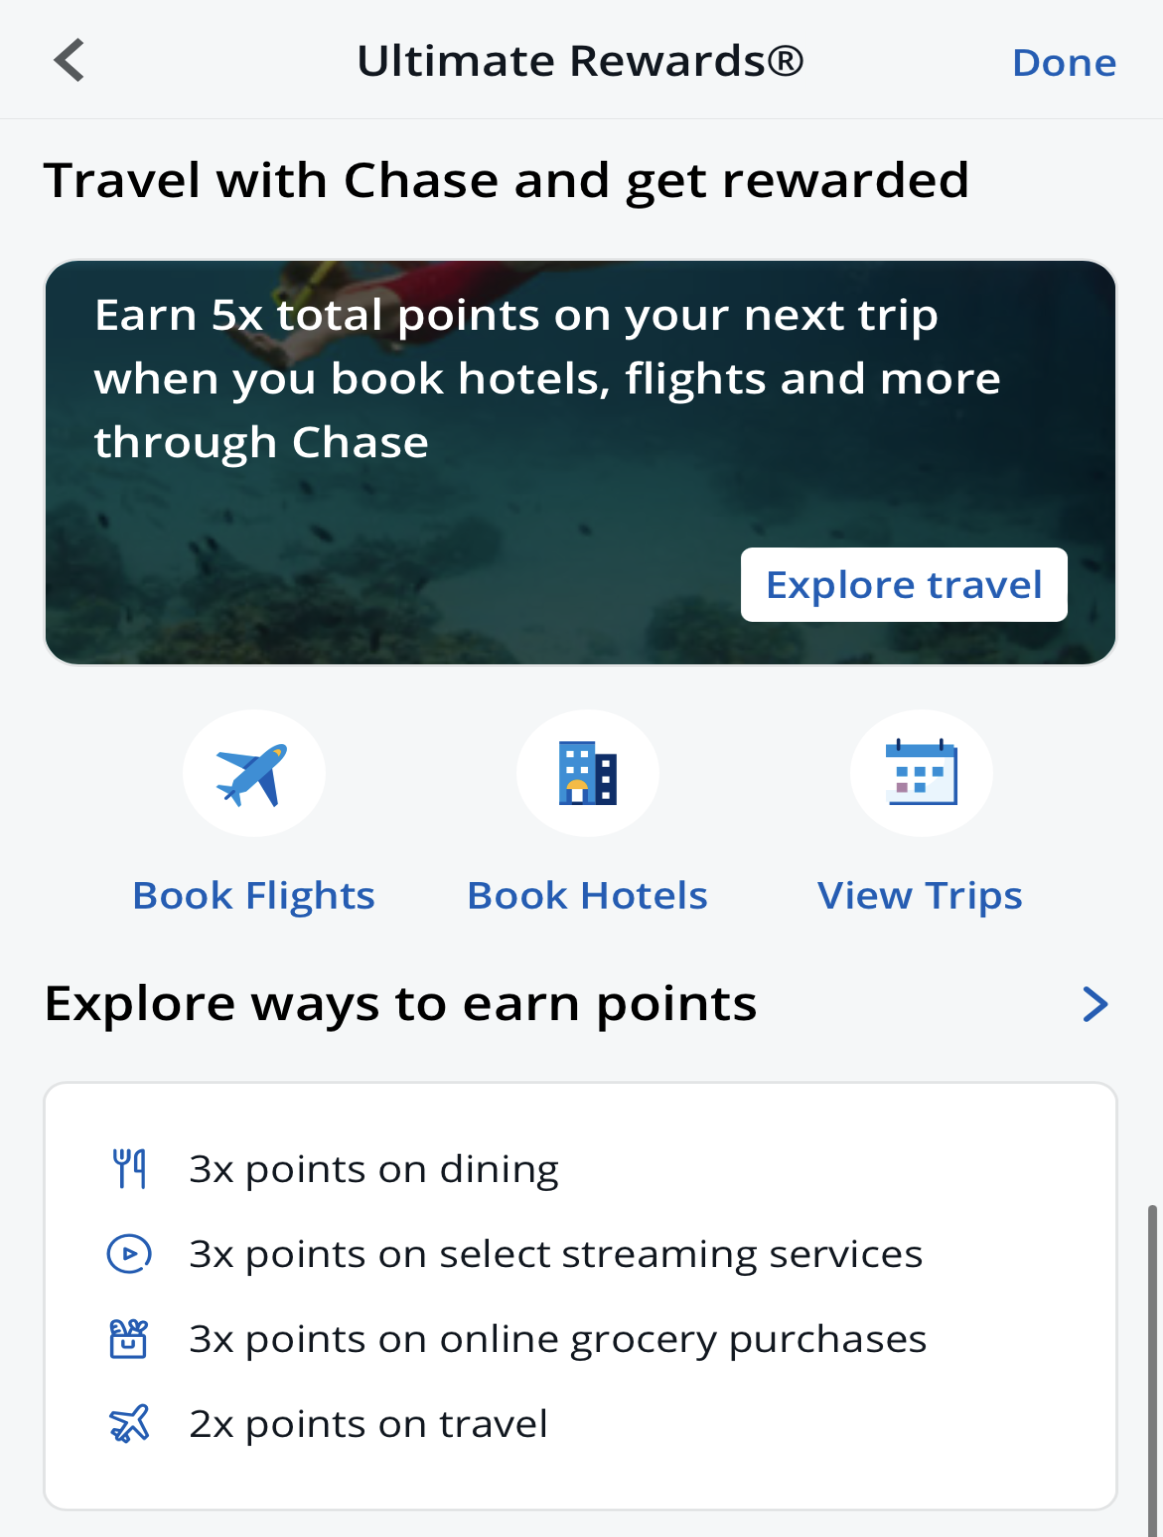 Chase Sapphire Preferred options on Chase Ultimate Rewards options